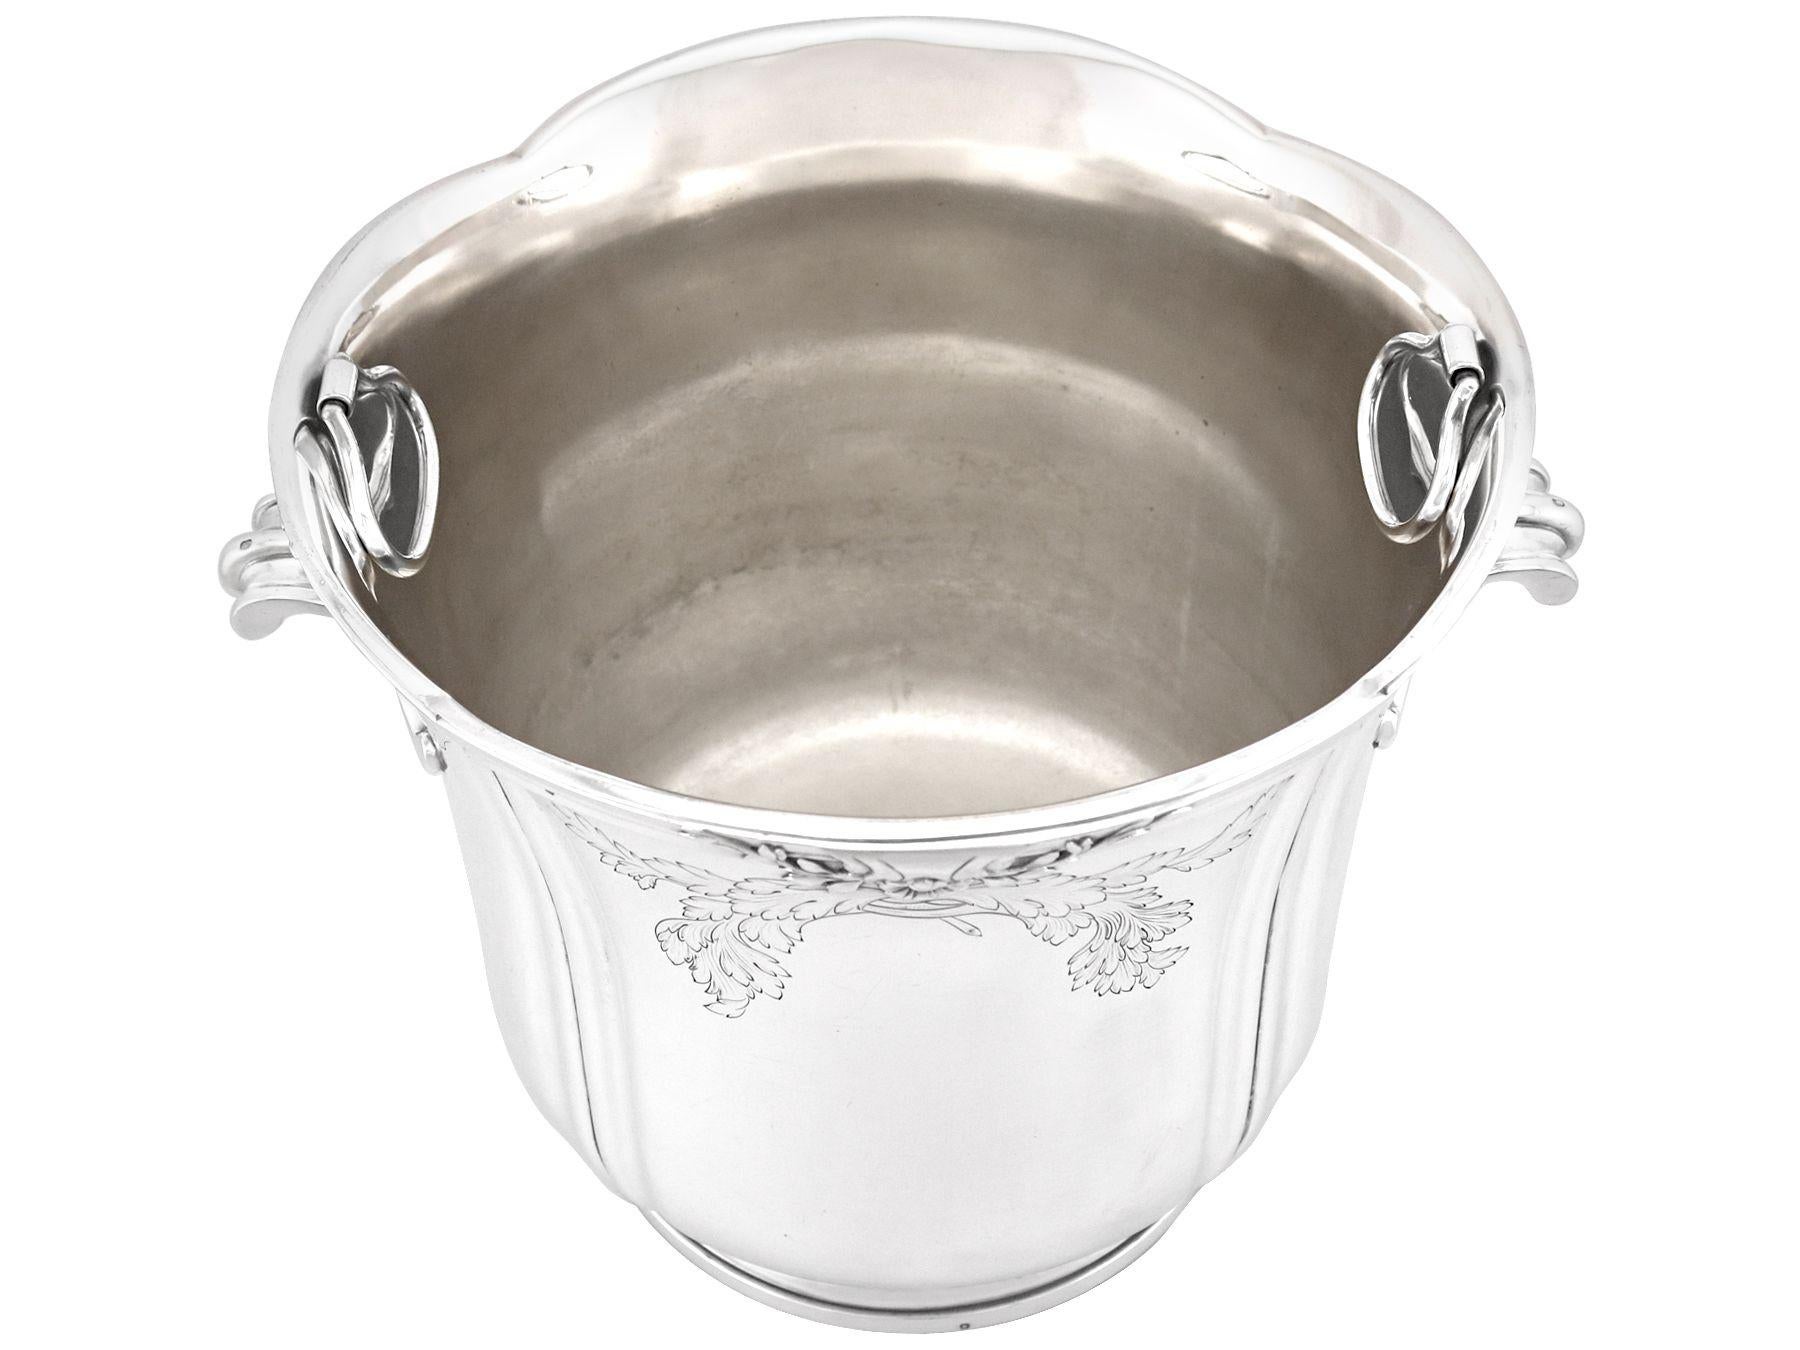 An exceptional, fine and impressive antique French silver wine/champagne cooler; an addition to our presentation silverware collection.

This exceptional antique French silver wine cooler has a circular rounded form.

The panelled surface of this